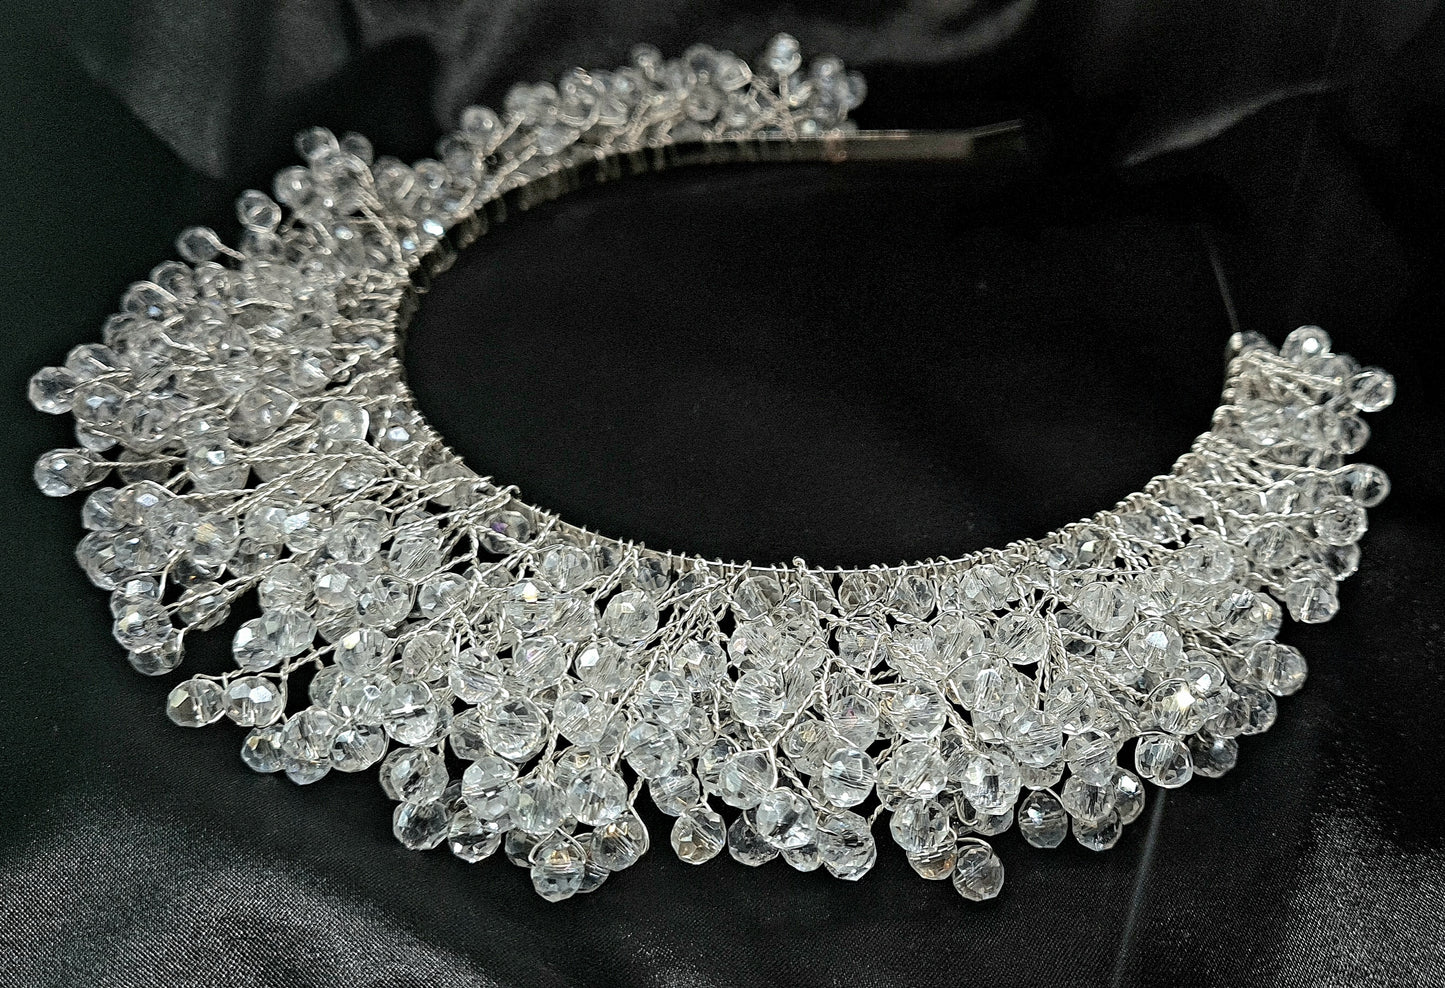 a bridal hair piece on a black background. The hair piece is made of pearls and crystals, and it has a delicate, feminine design. It is perfect for a bride who wants to add a touch of elegance to her wedding day look. The hair piece is shown on a black background, so the pearls and crystals stand out beautifully